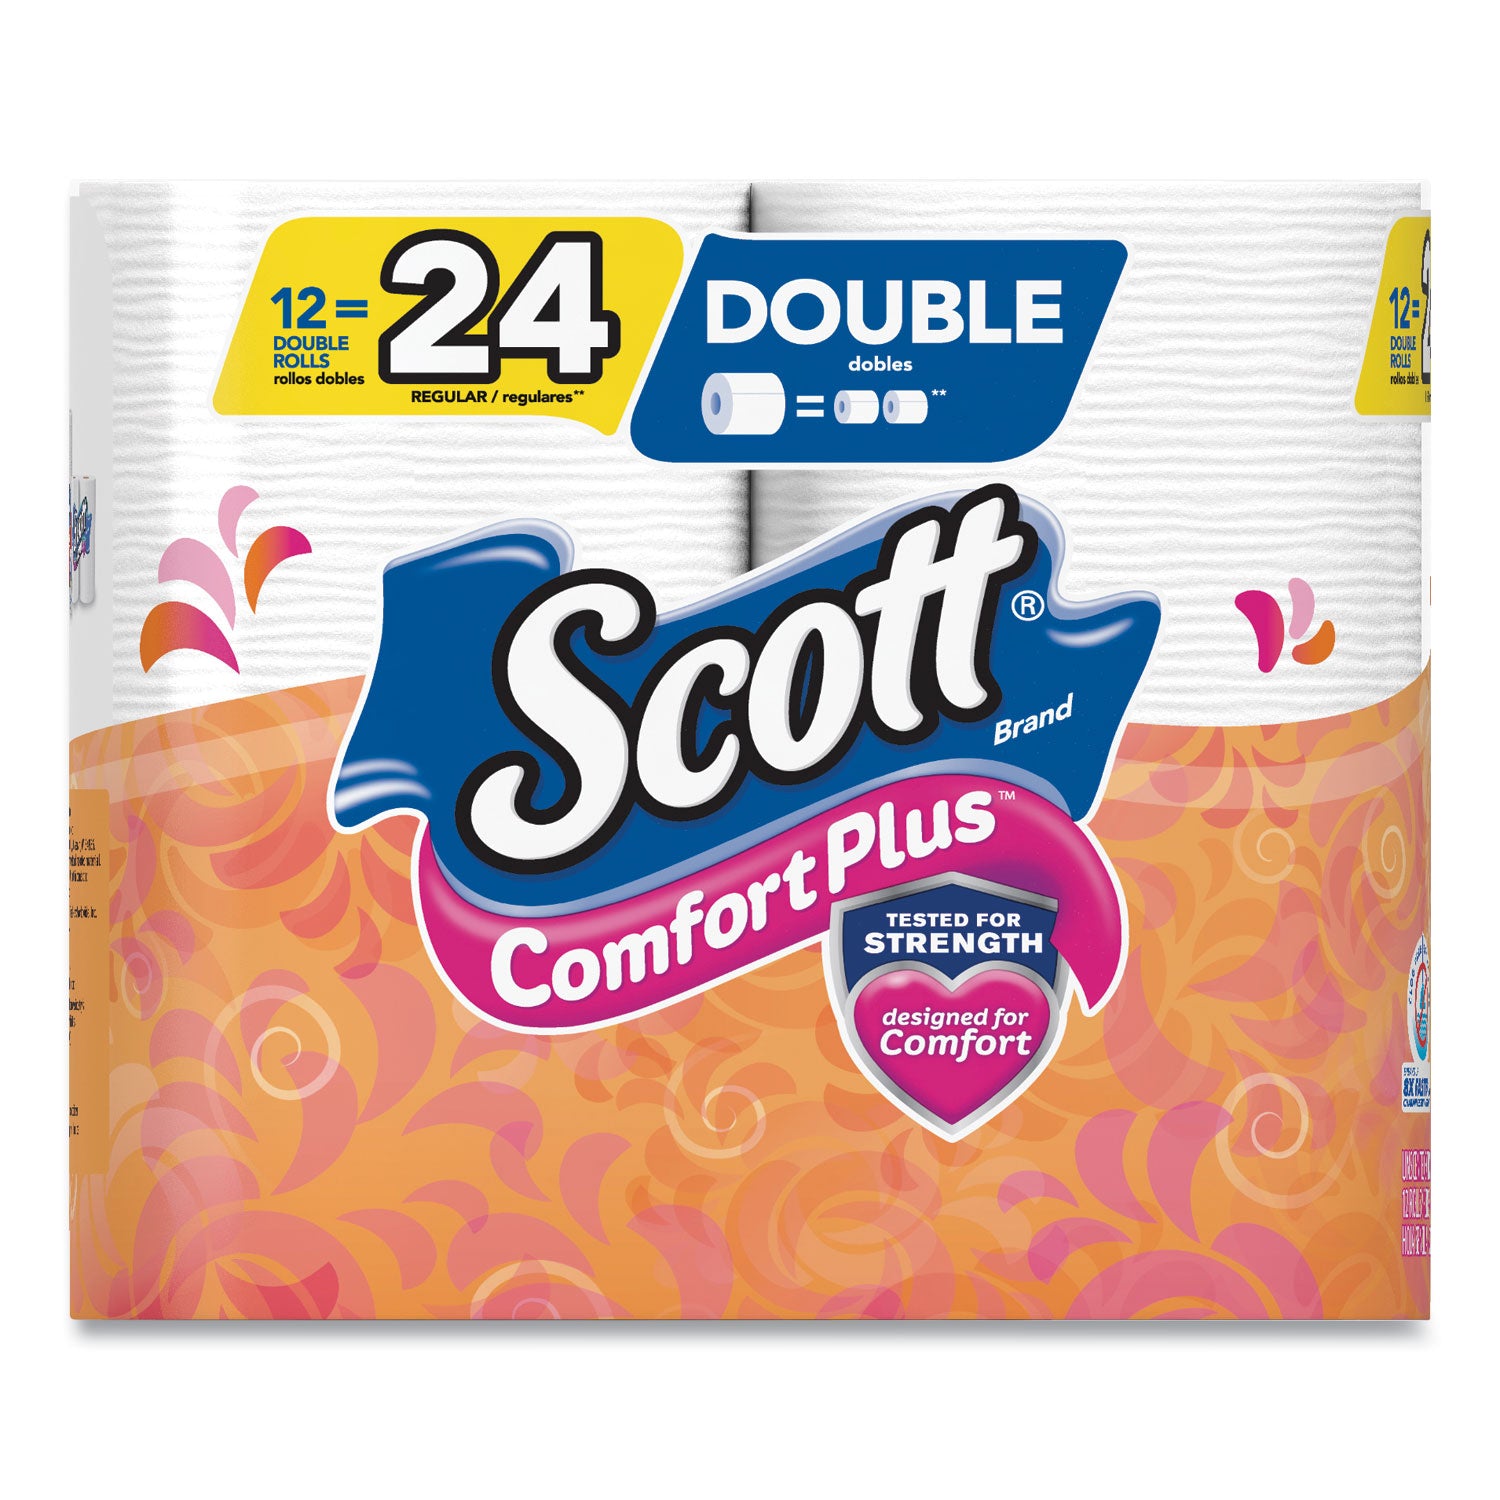 comfortplus-toilet-paper-double-roll-bath-tissue-septic-safe-1-ply-white-231-sheets-roll-12-rolls-pack-4-packs-carton_kcc47618 - 6